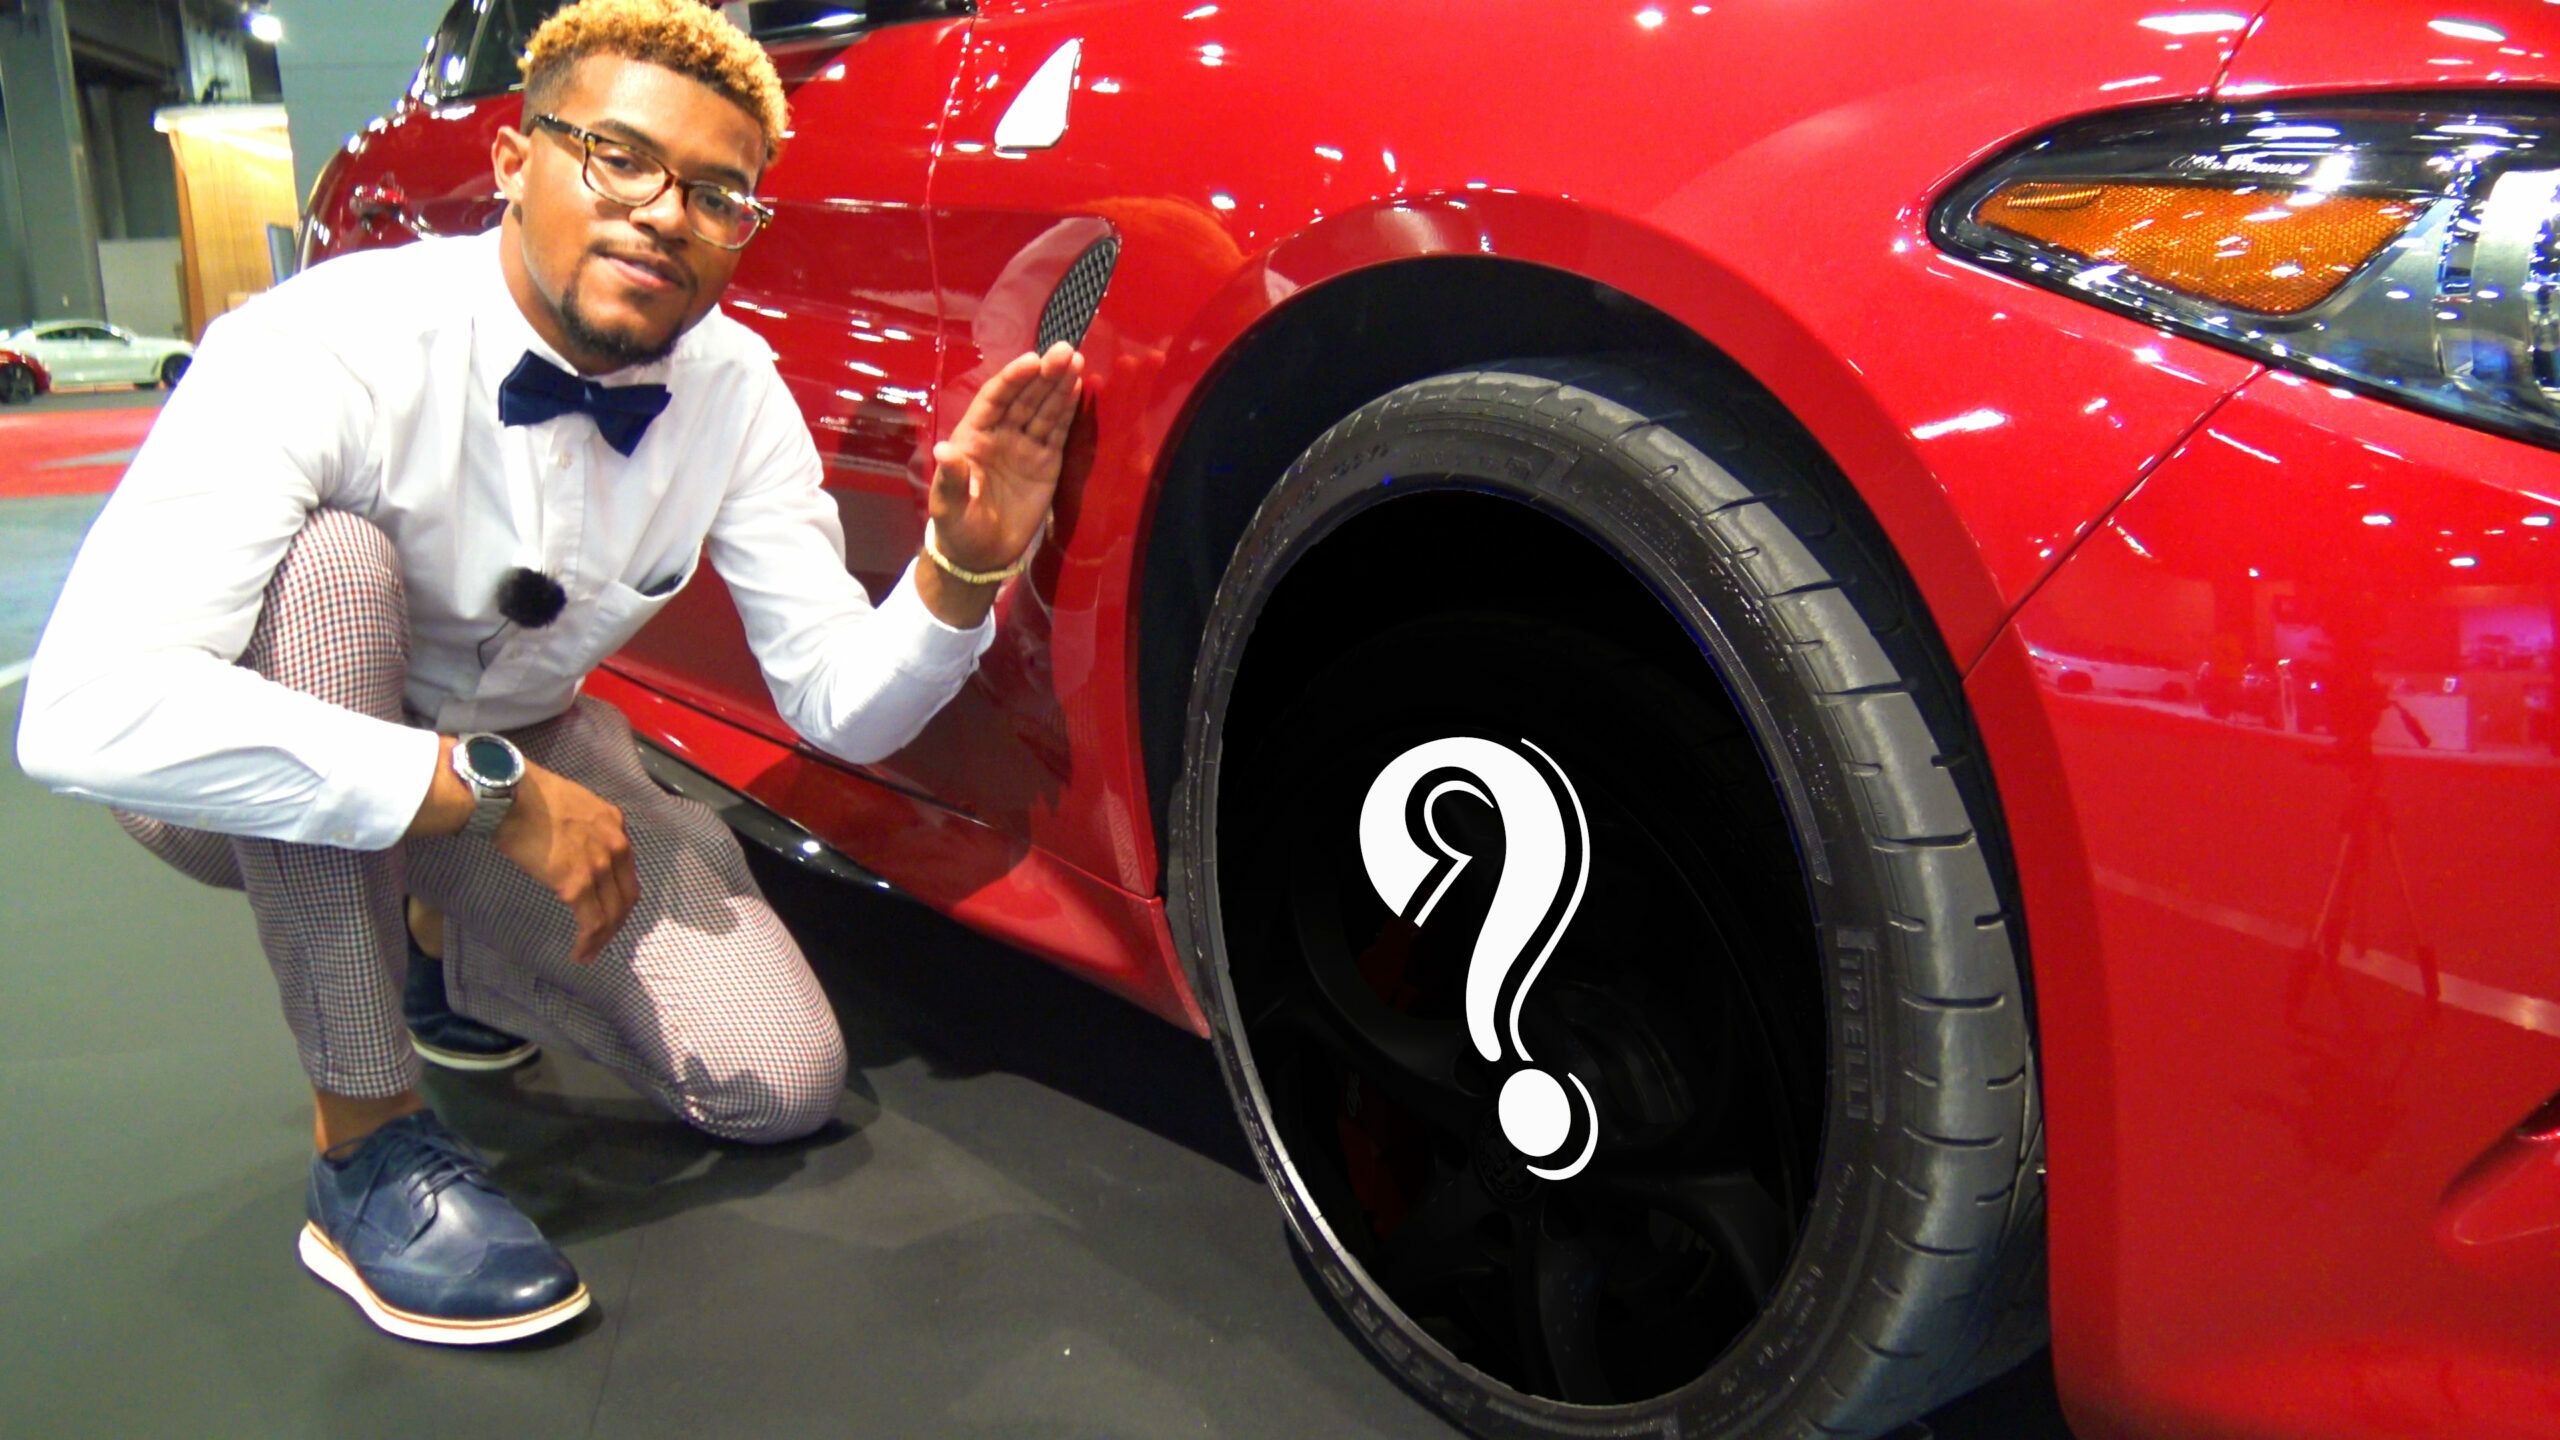 Marcus Walker next to red car (question mark covering the car's wheel/rim design).